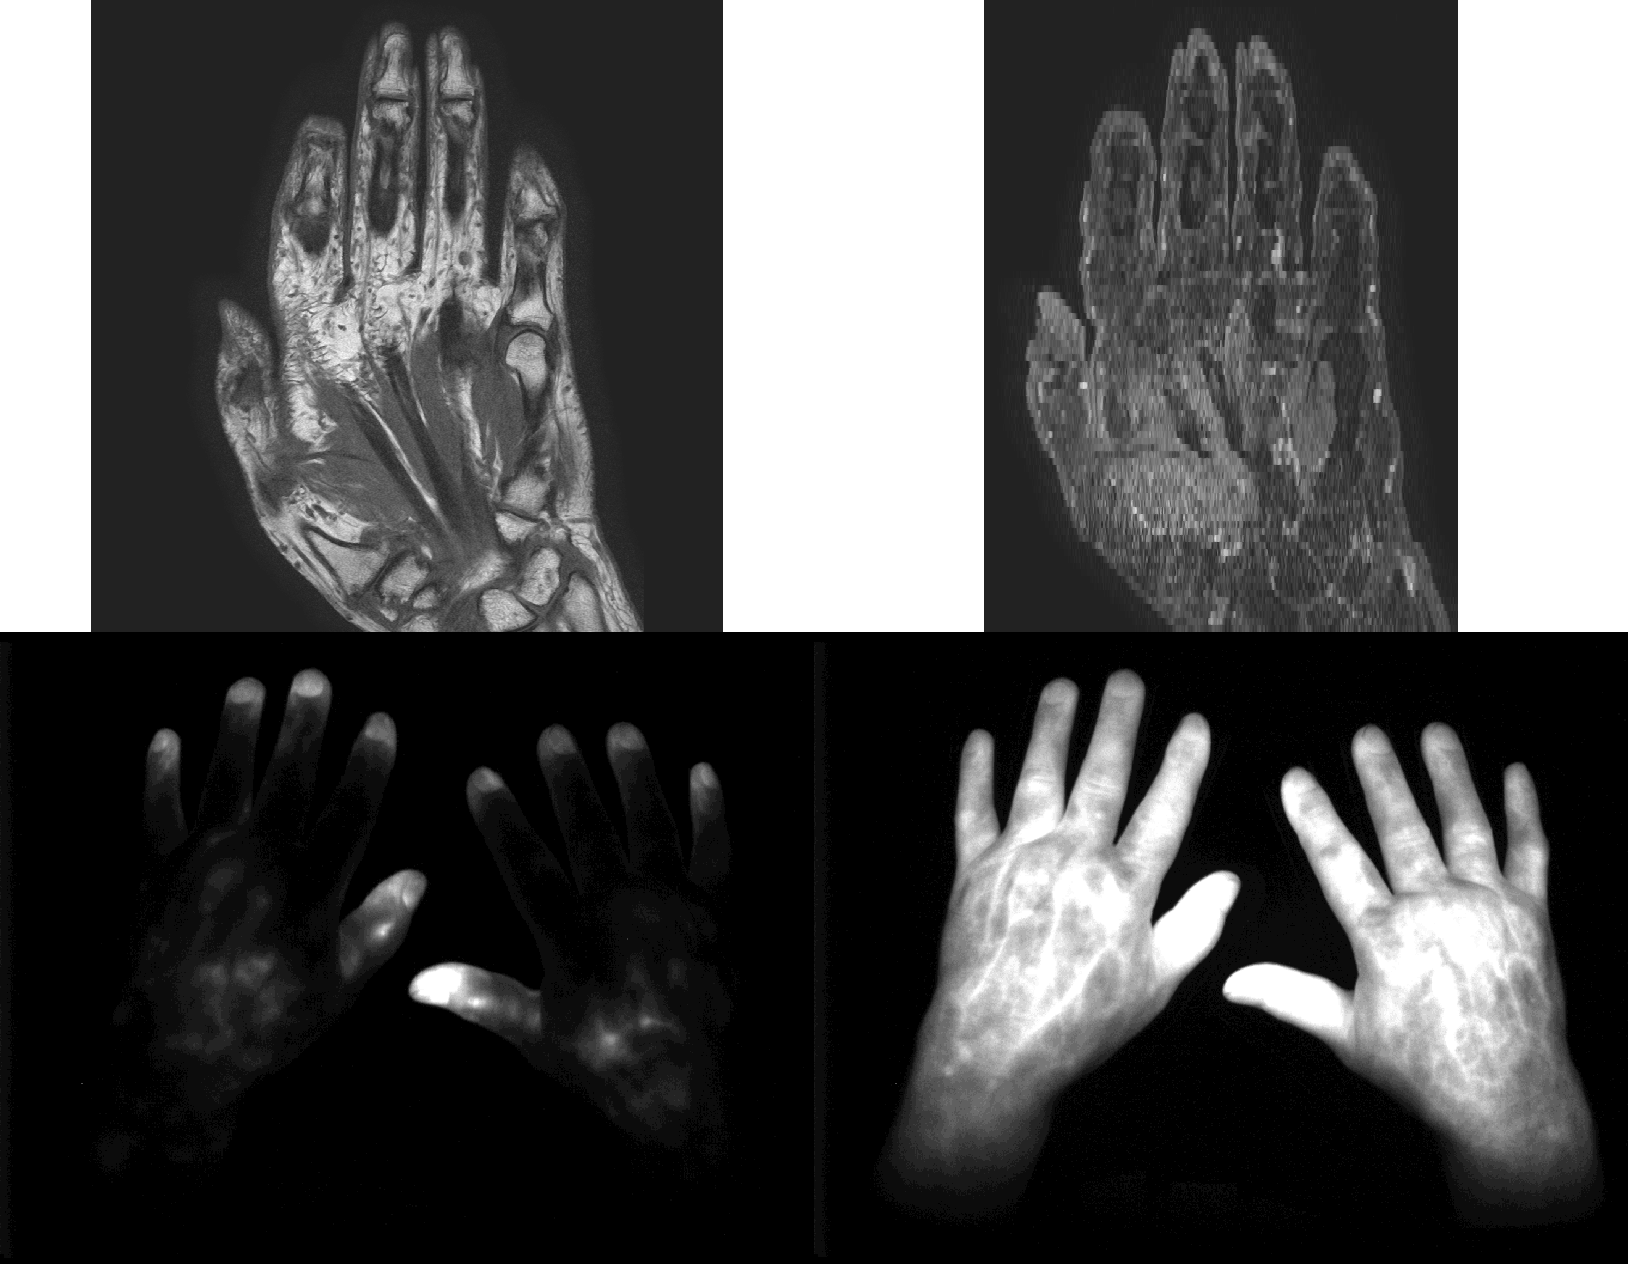 Image data that can be used in the diagnosis of psoriatic arthritis: T1-weighted MRI (top left), fat-saturated MRI (top right), and fluorescence optical image series (bottom; left: early stage during the influx of the fluorescence agent, right: later stage during the influx of the fluorescence agent)